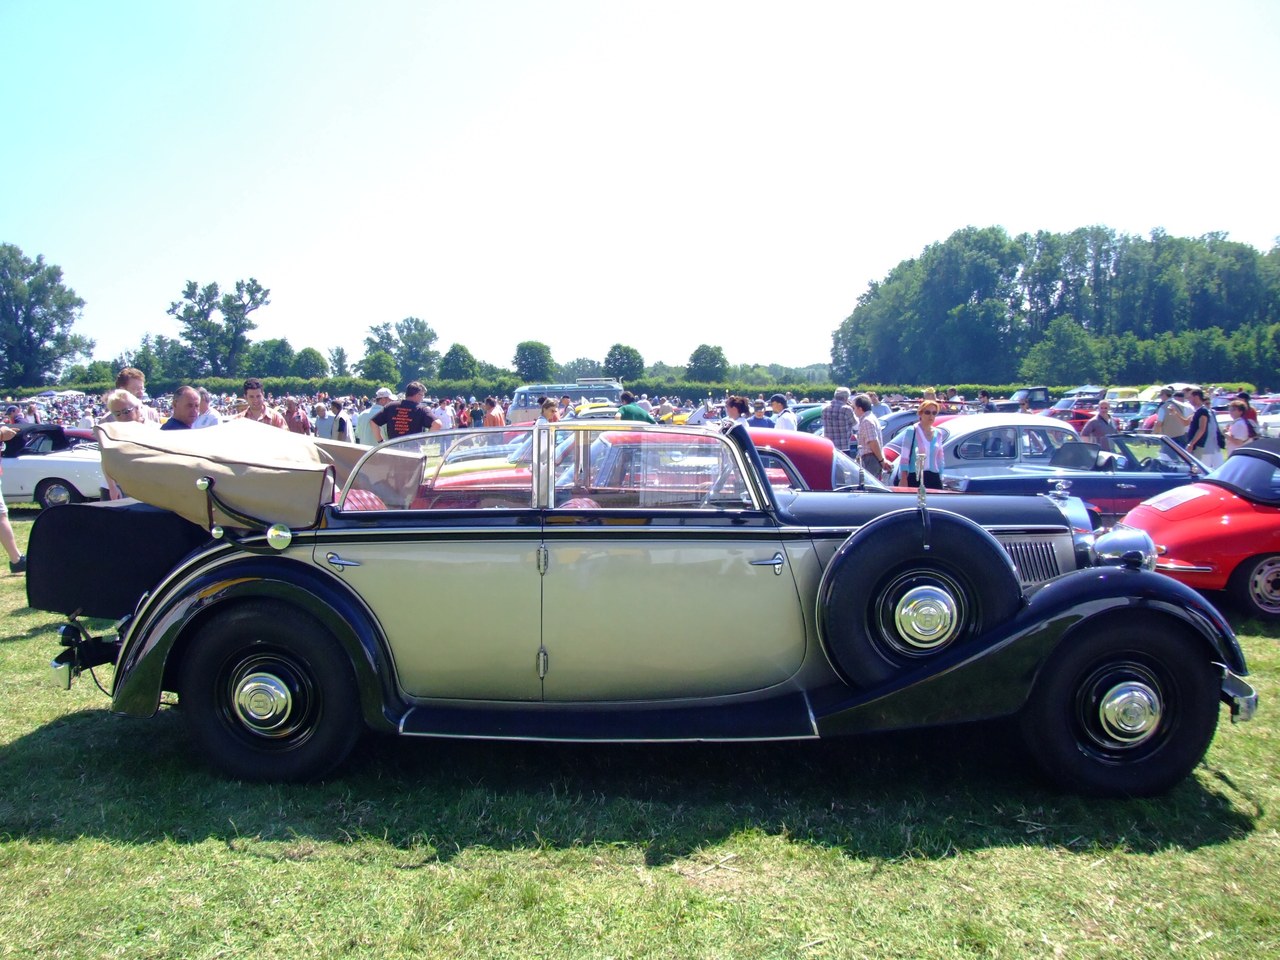 Horch 830BL